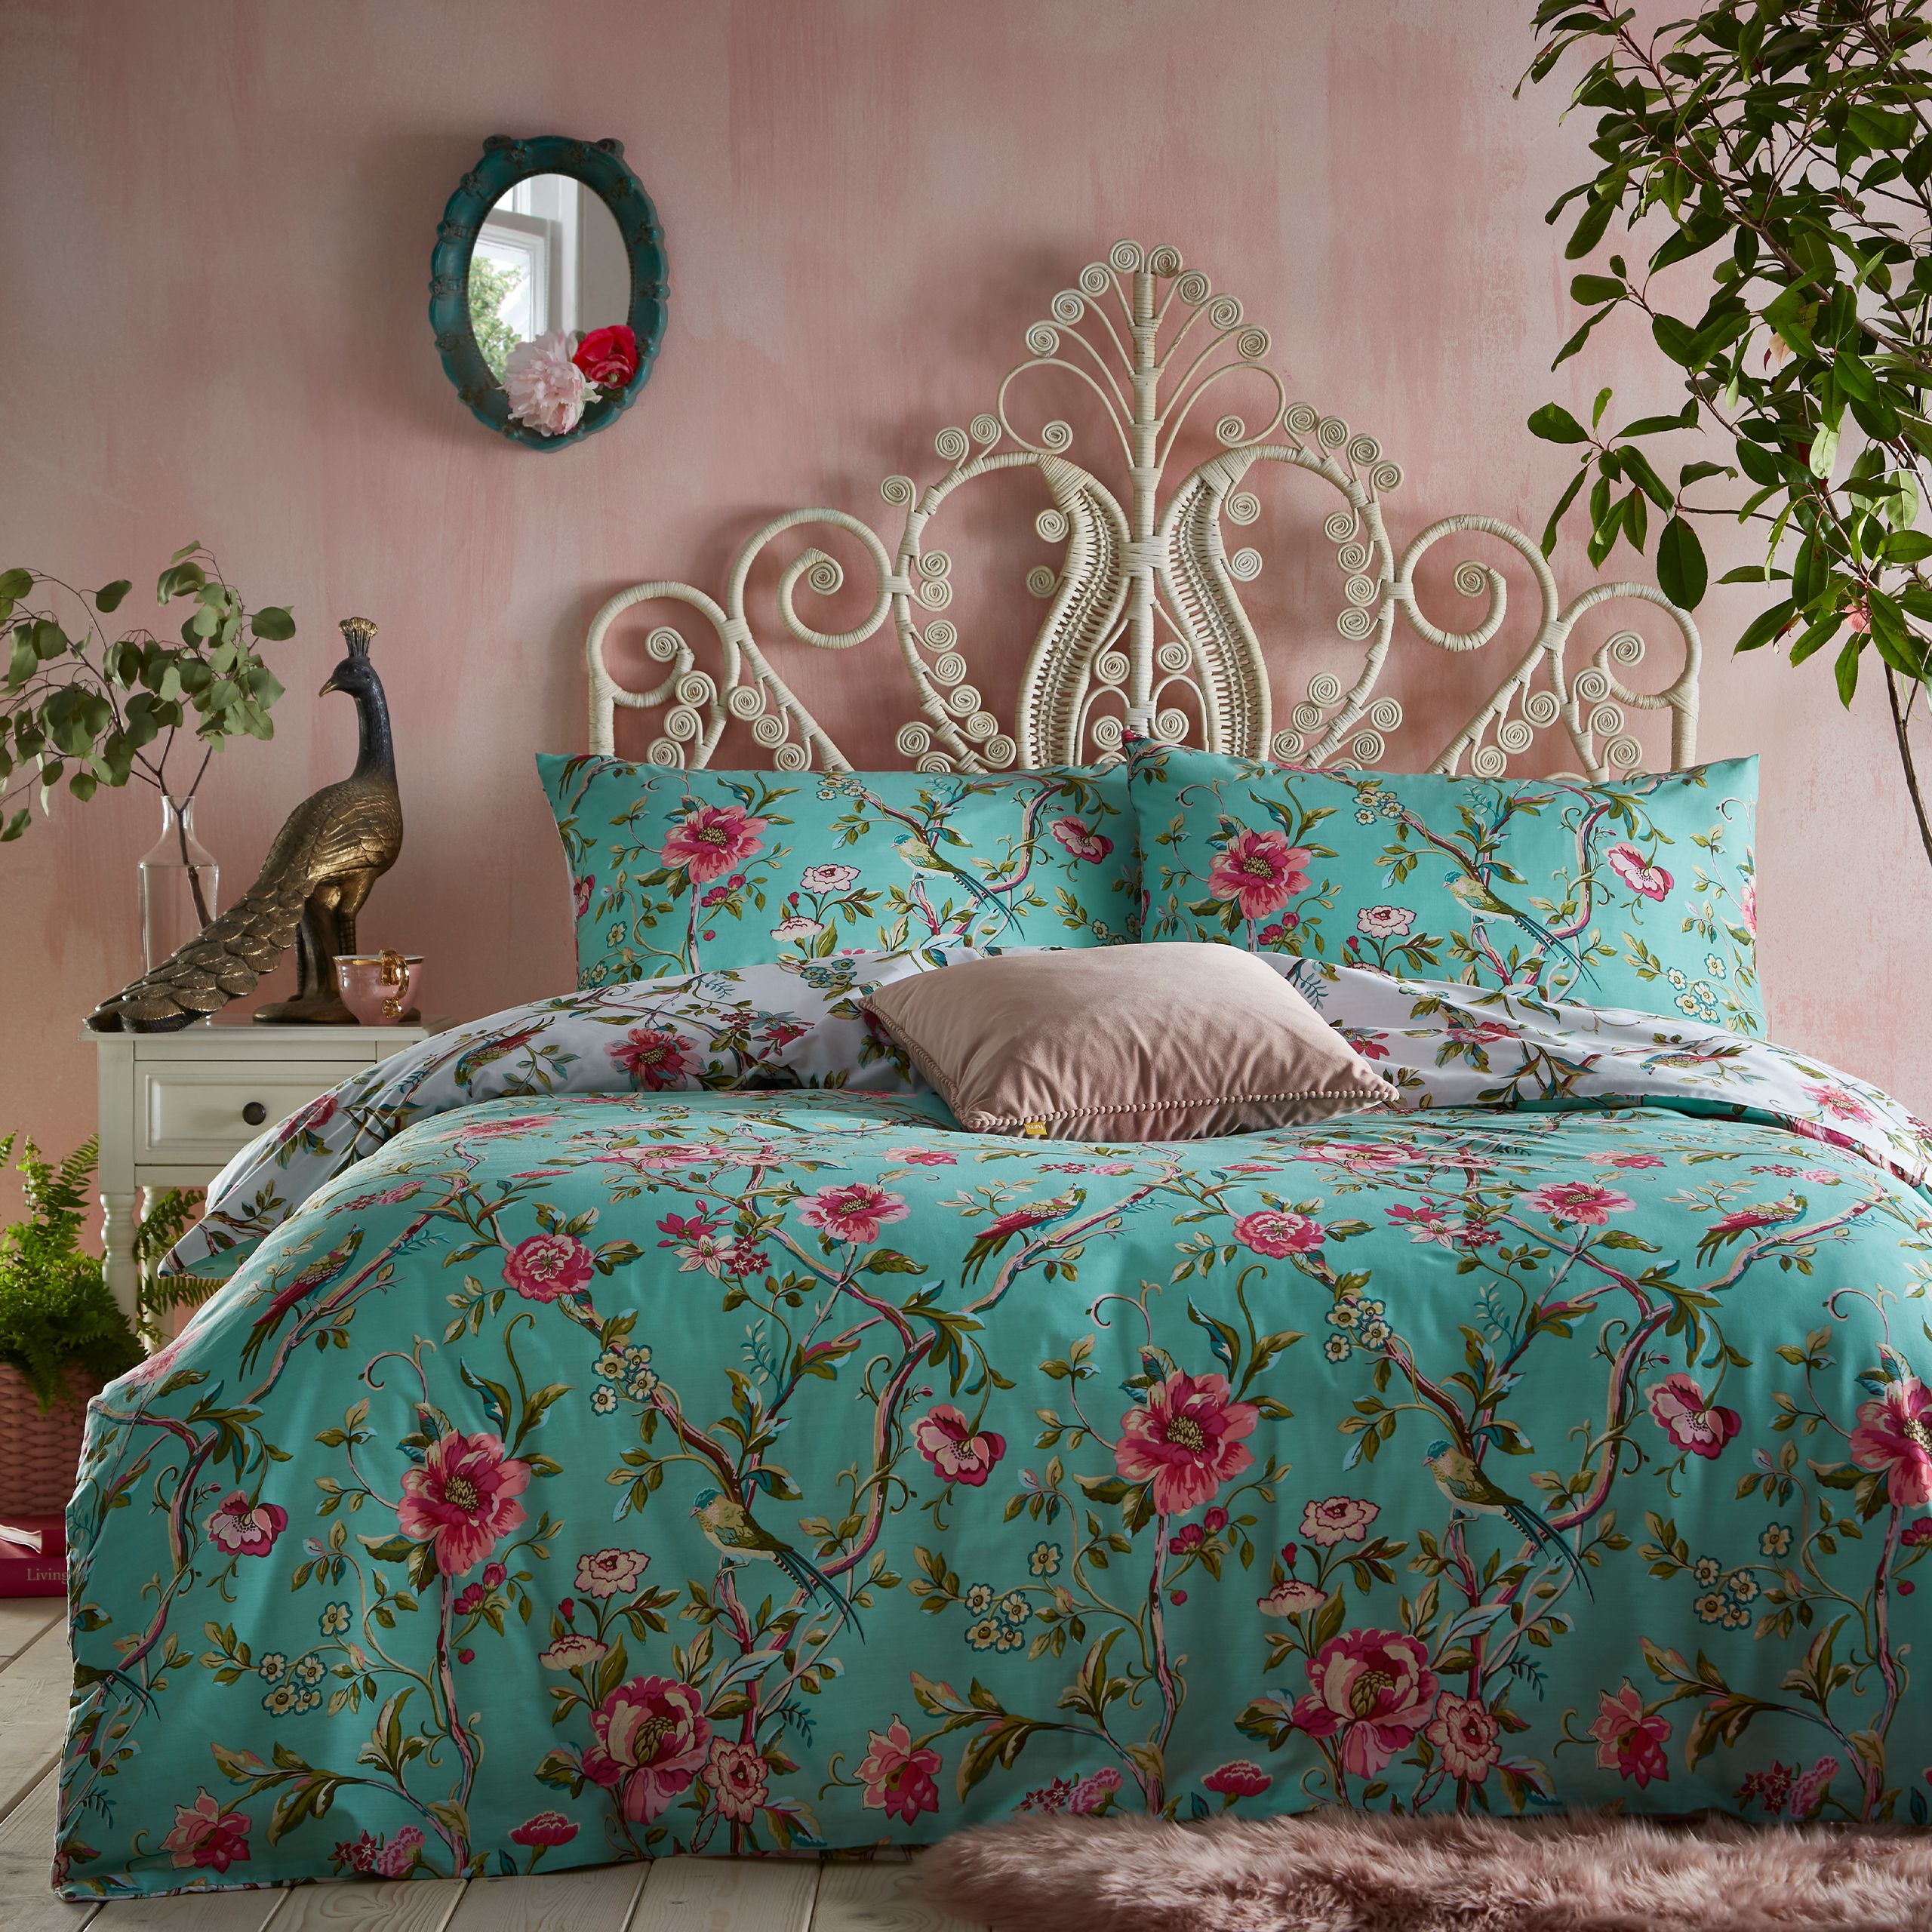 Add a romantic touch to your bedroom with the Vintage Chinoiserie bedding, featuring swirling floral vines and beautiful exotic birds. With a coordinating design on the reverse, on a fresh, light base for a more tranquil look.